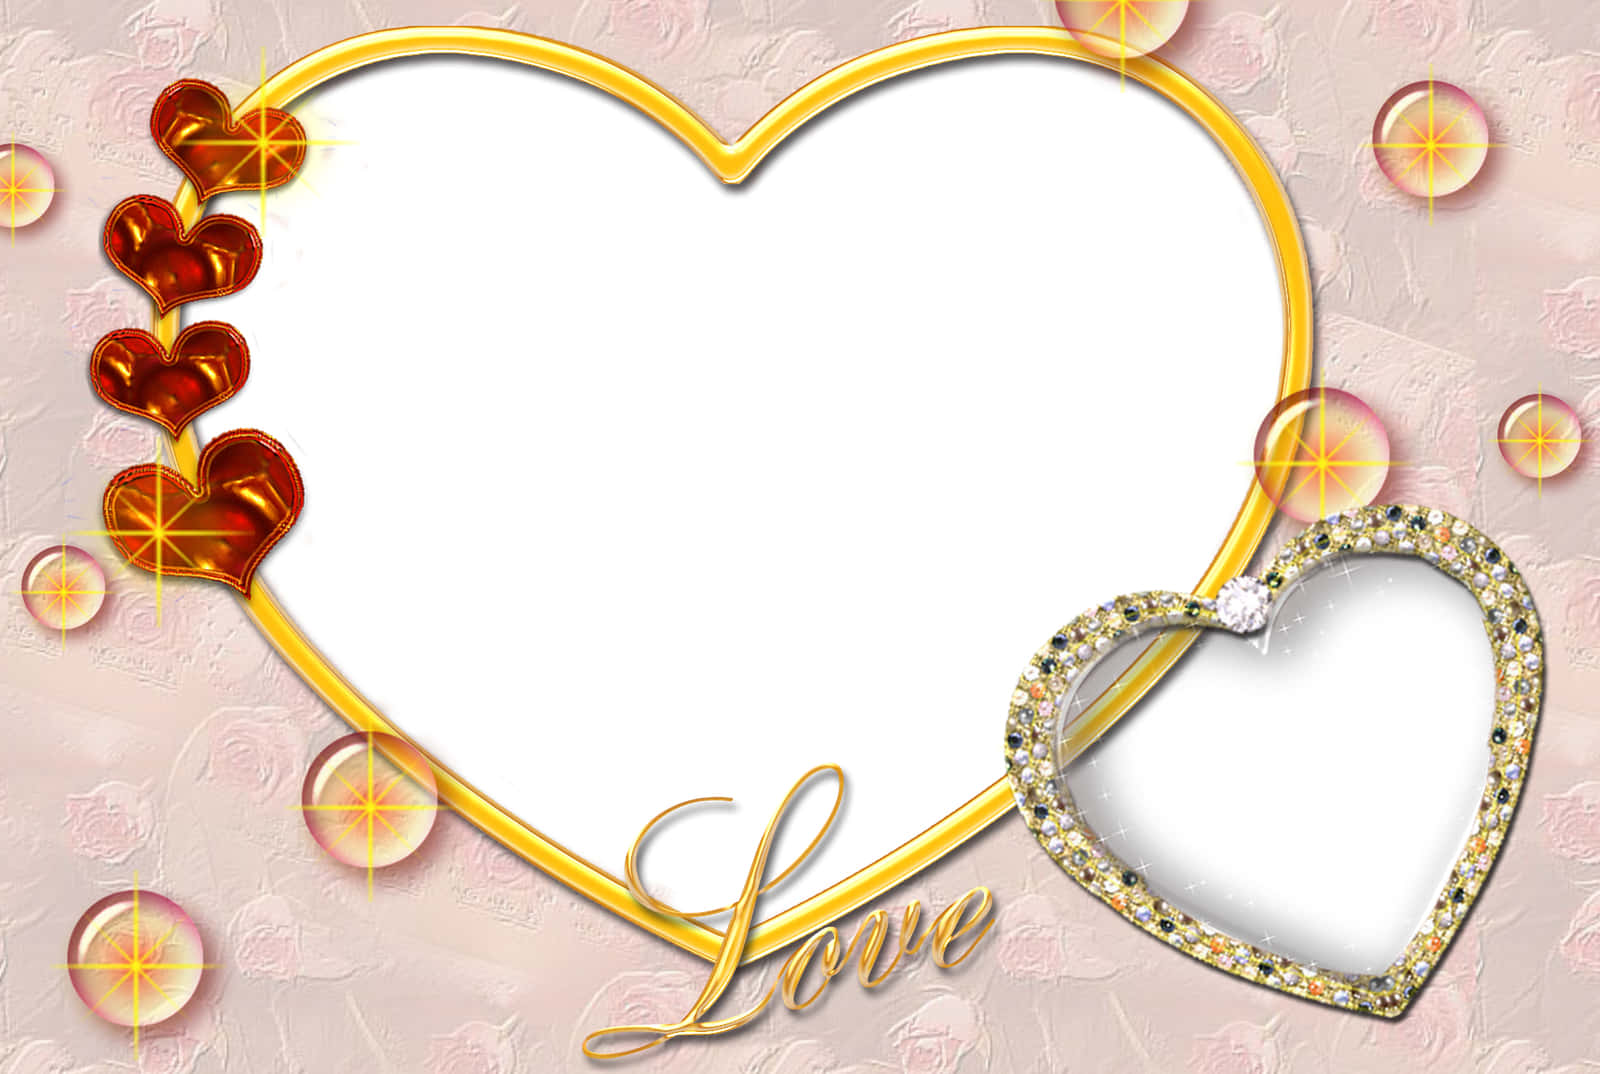 A Heart Shaped Frame With Gold Hearts And Flowers